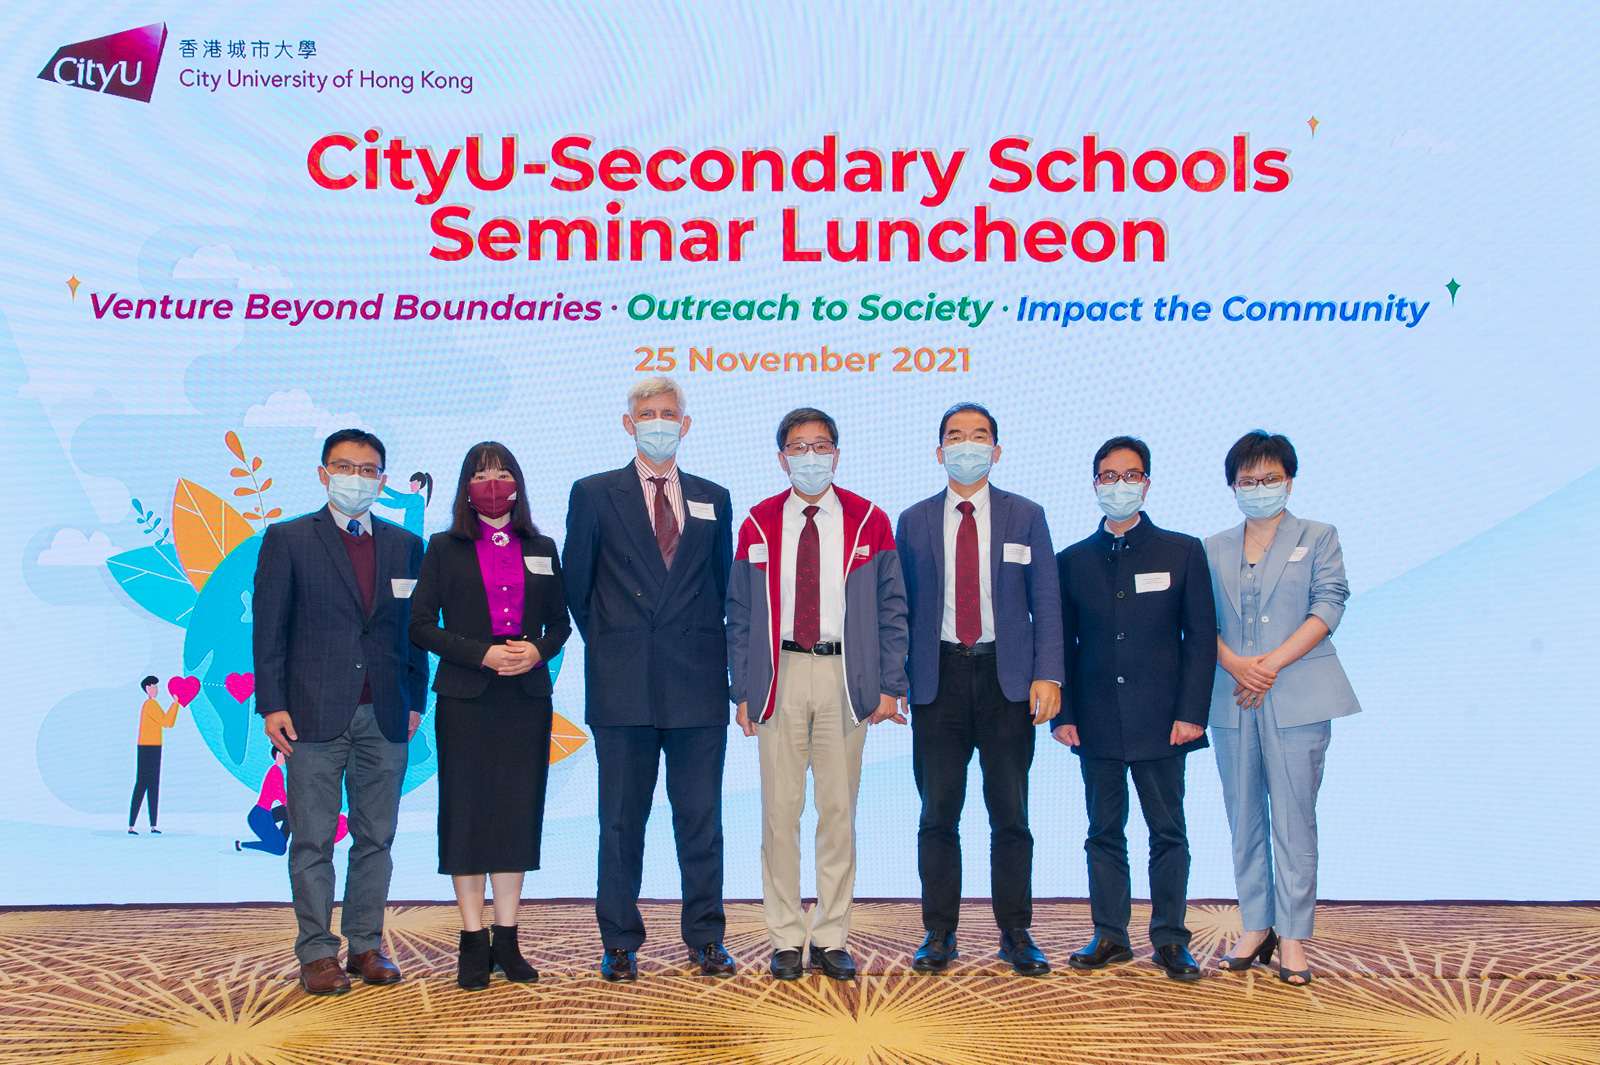 CityU’s exciting initiatives for talented students are shared in the seminar.